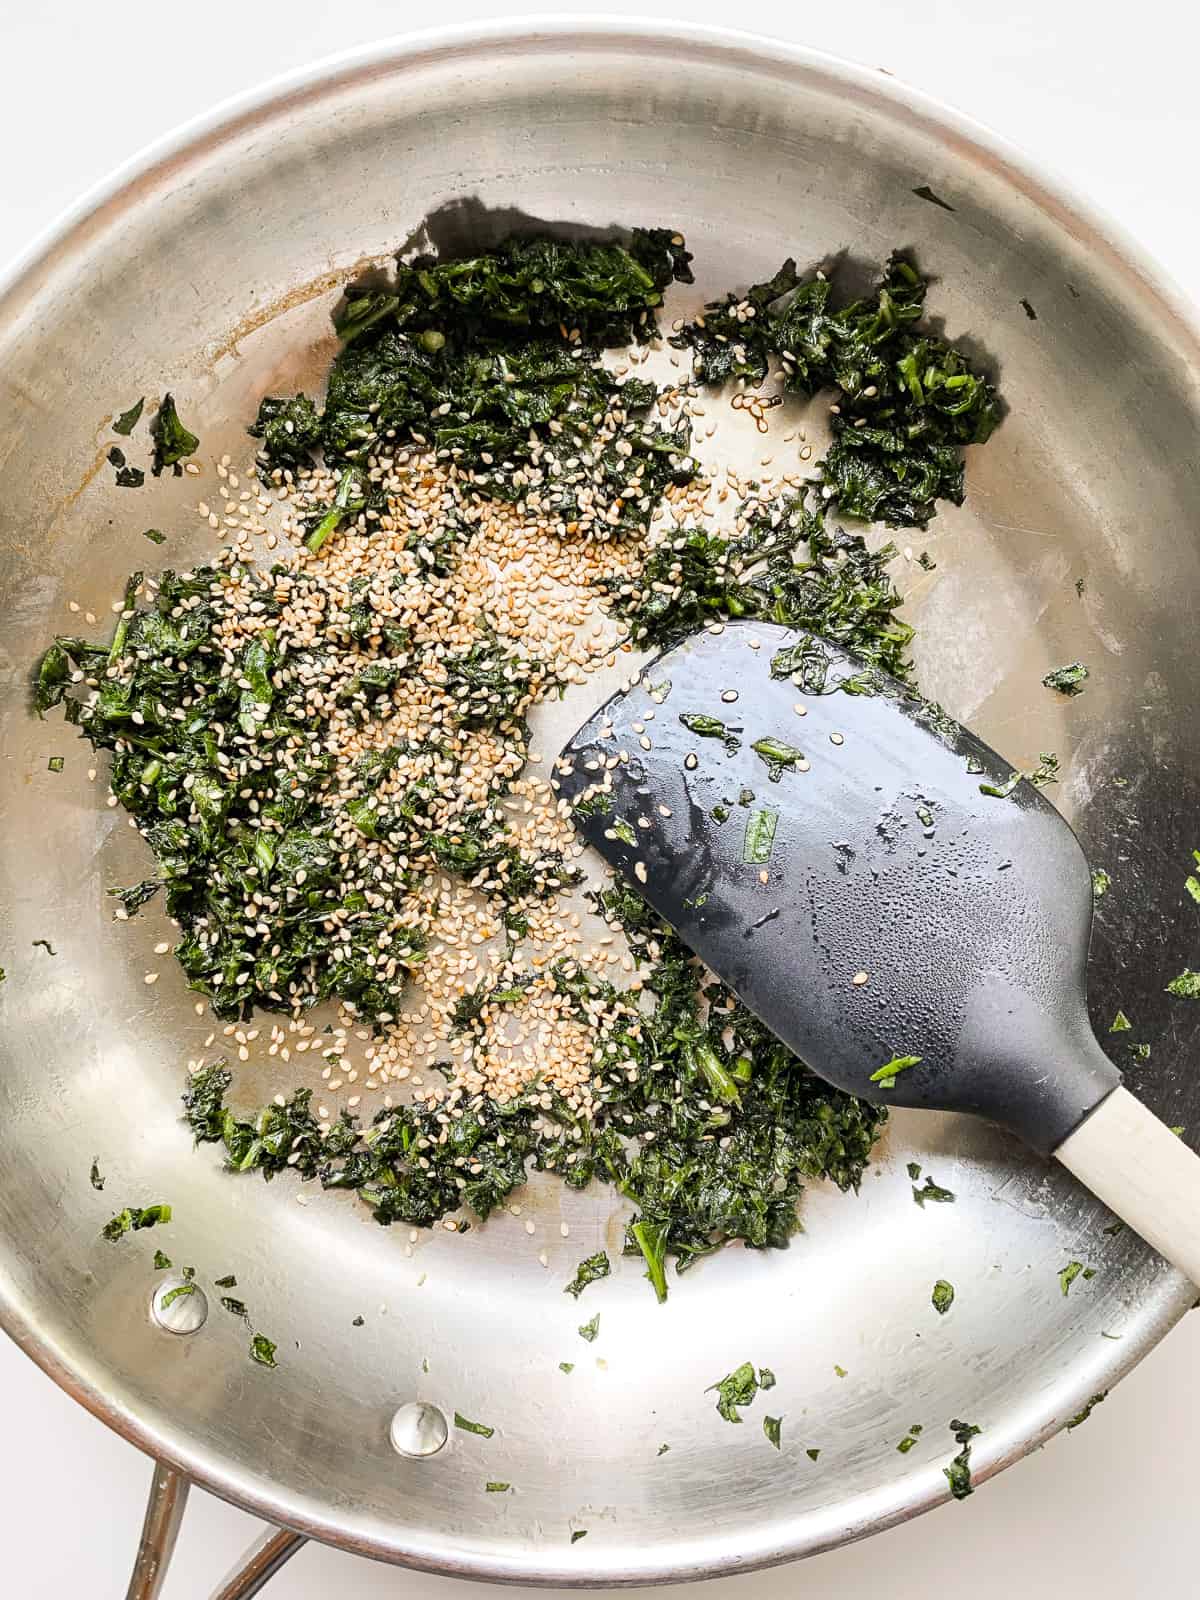 An image of greens and sesame seeds in a pan being cooked.